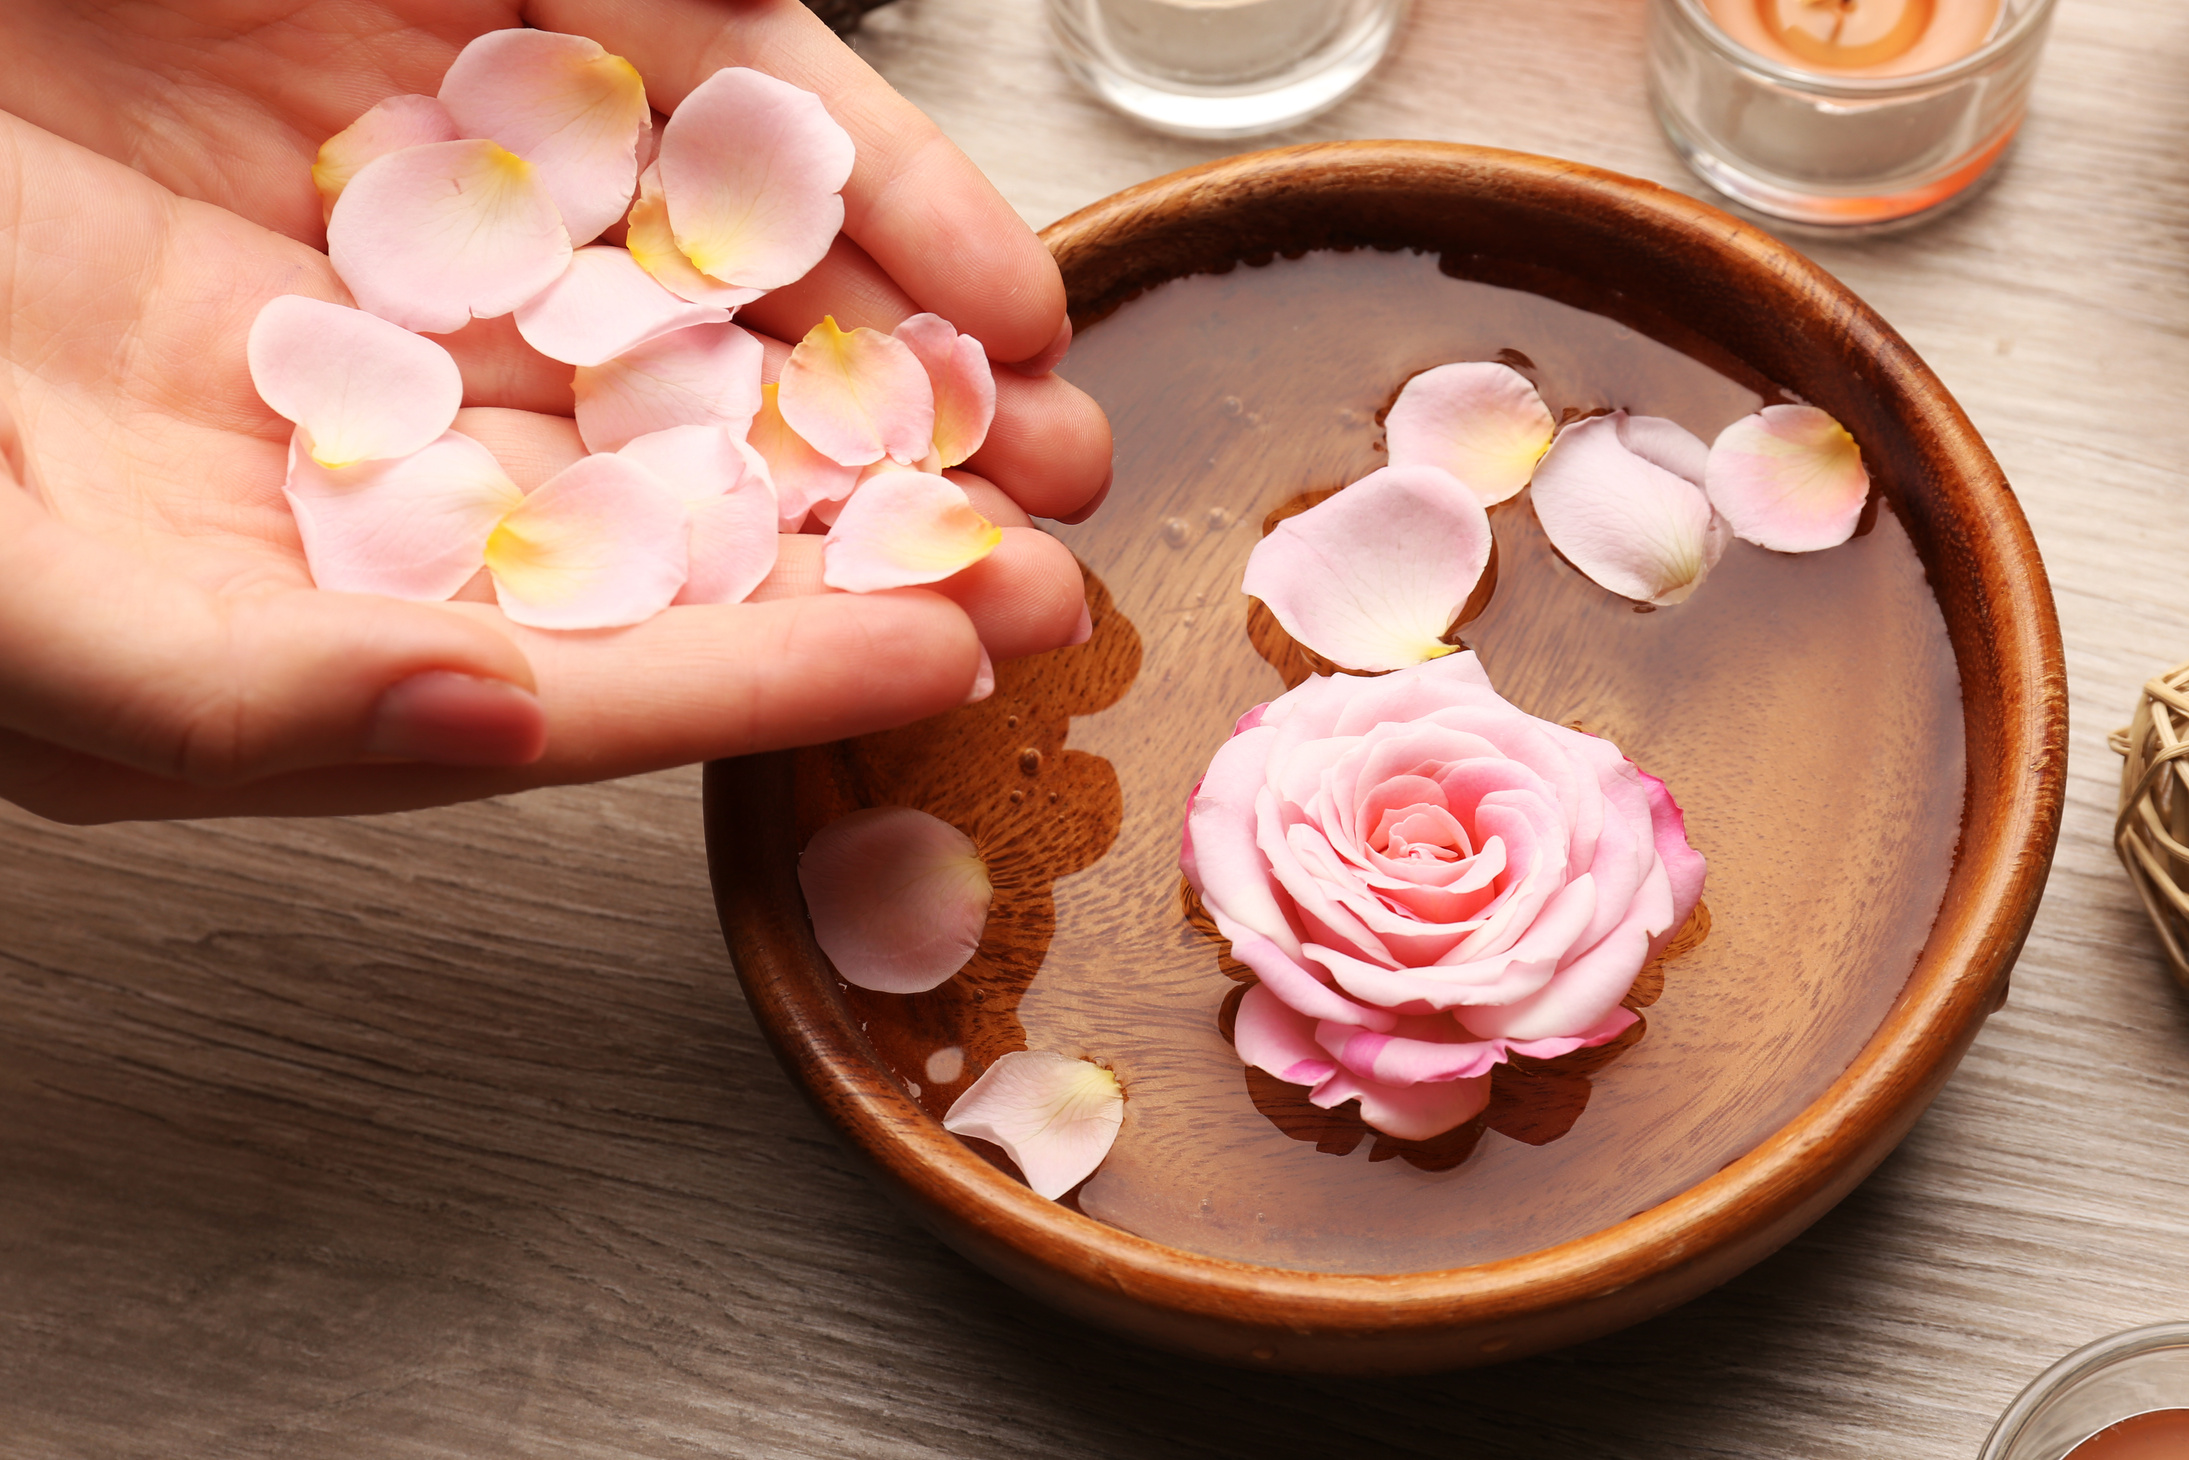 Hands and Bowl of Spa Water with Flowers